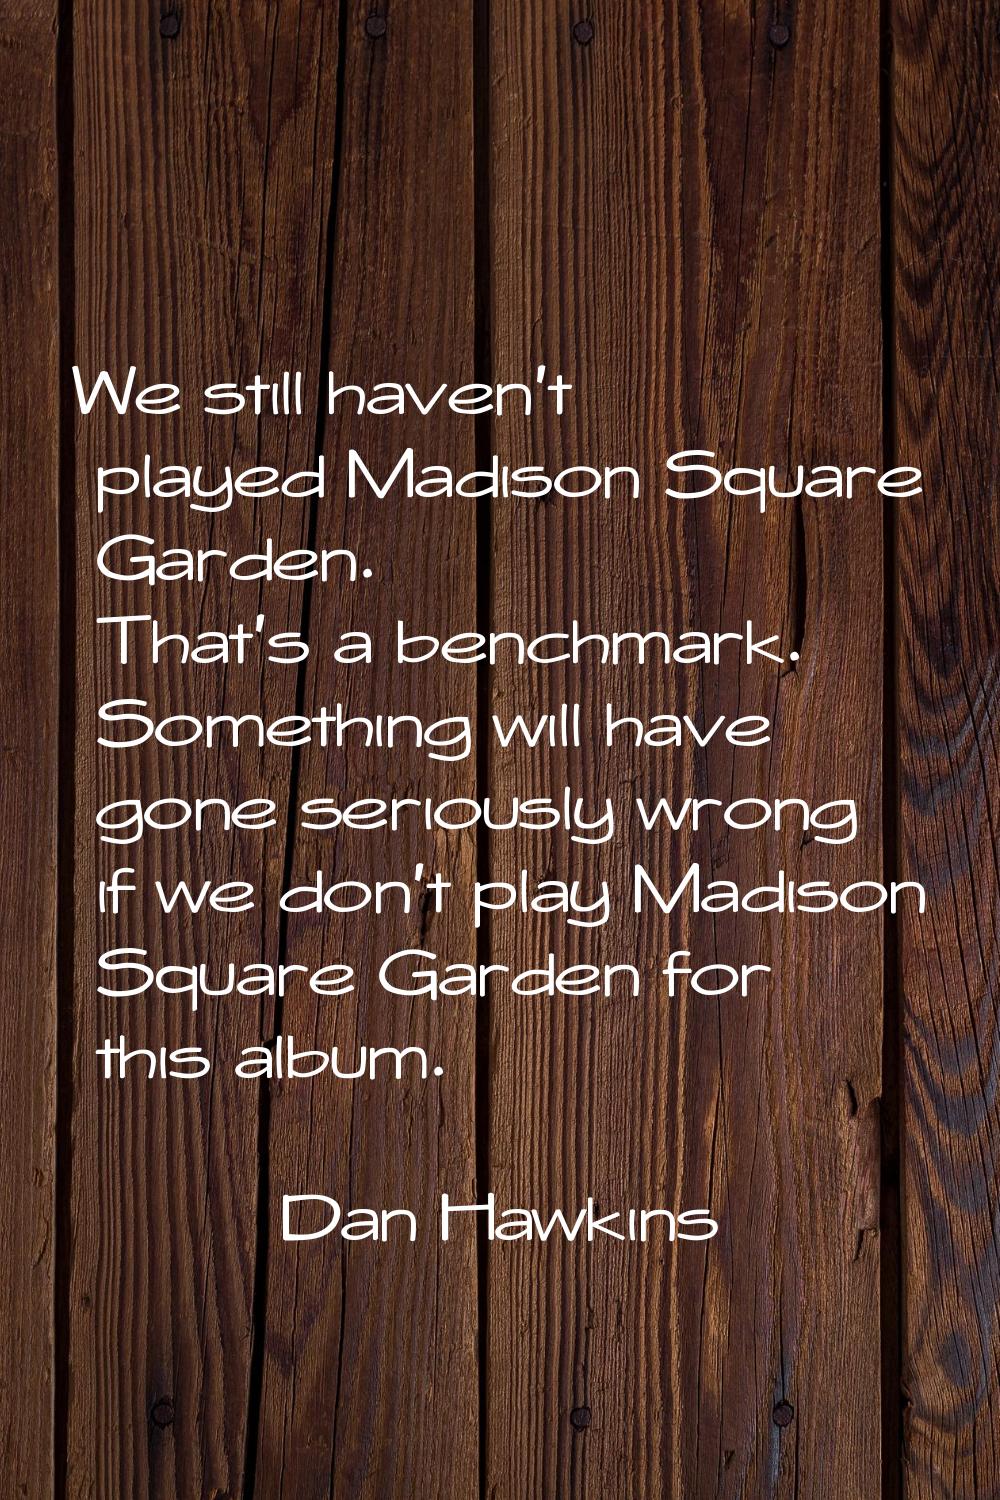 We still haven't played Madison Square Garden. That's a benchmark. Something will have gone serious